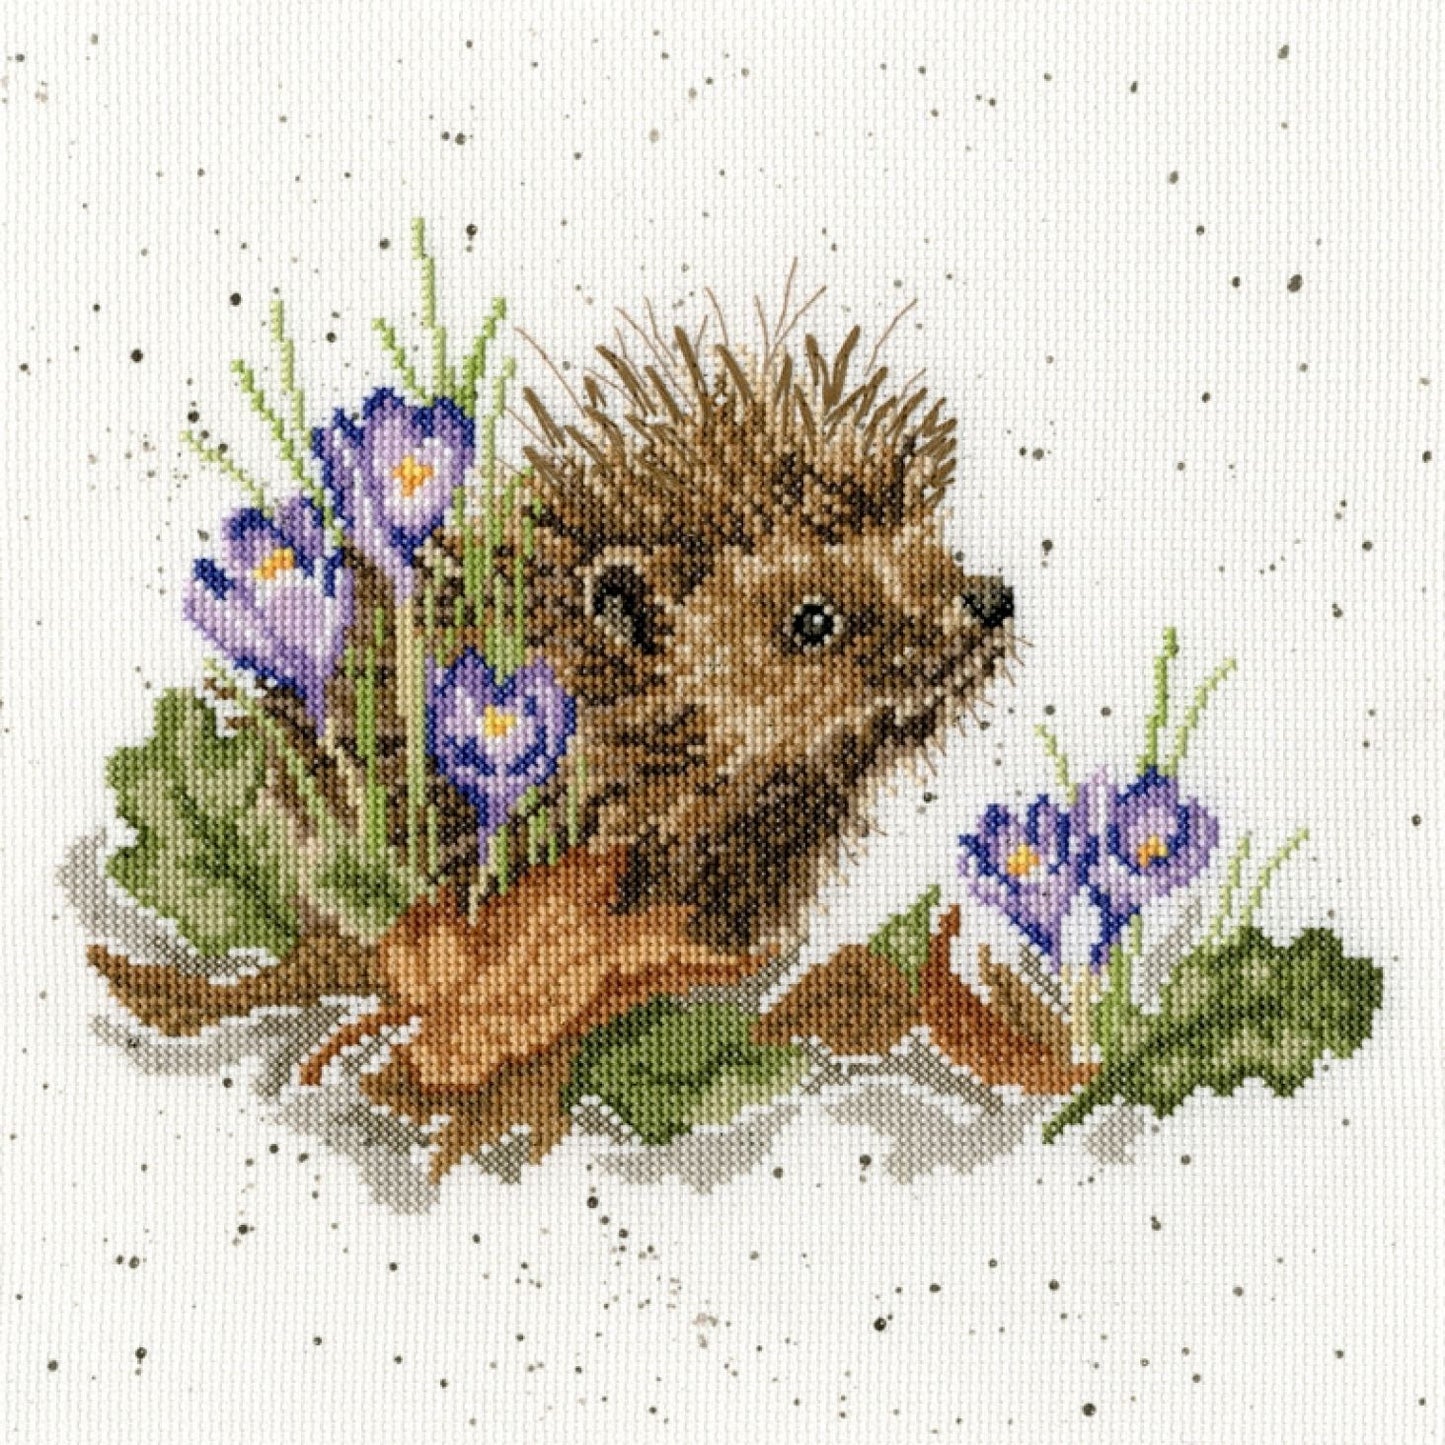 New Beginnings - Hedgehog Counted Cross Stitch Kit by Bothy Threads